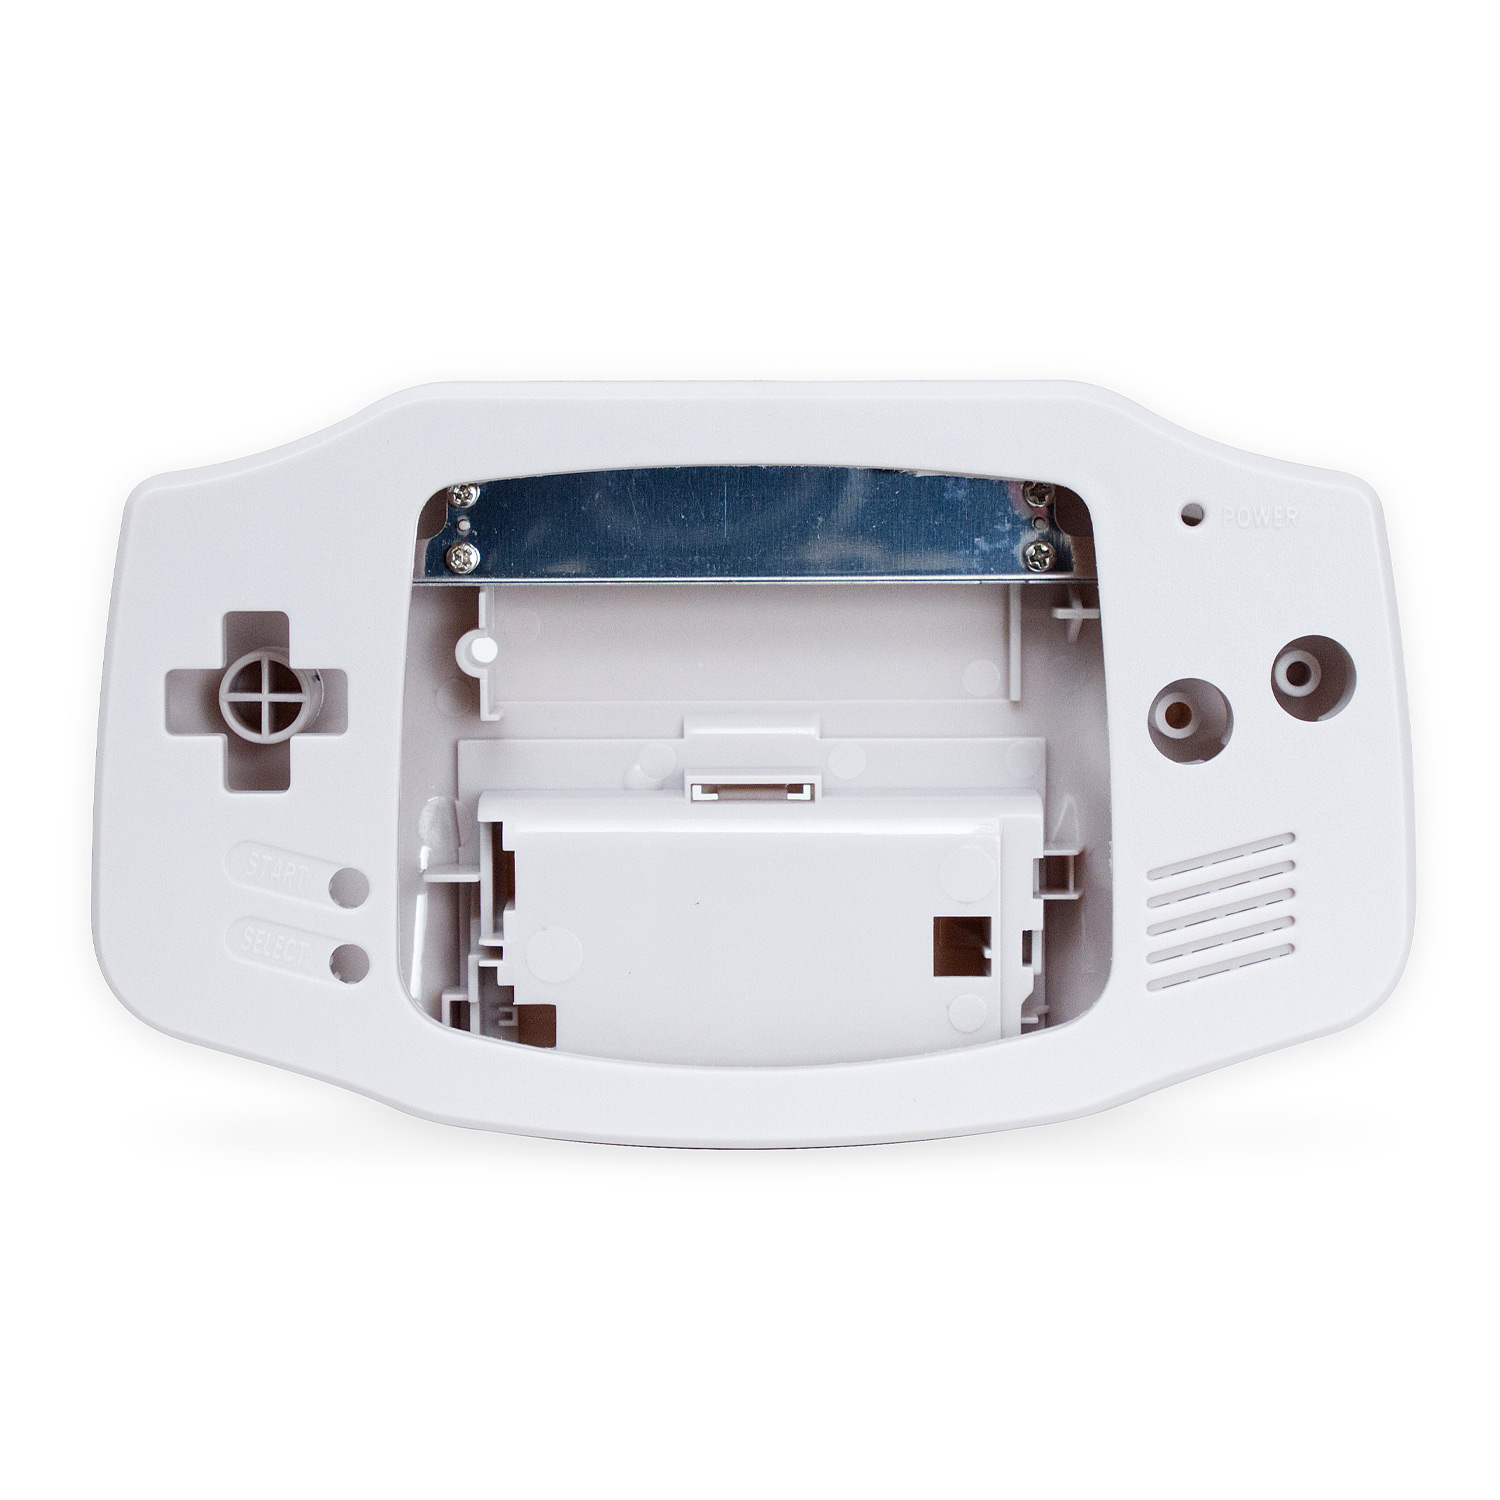 Game Boy Advance Shell for CleanScreen Laminated Kit (Grey)